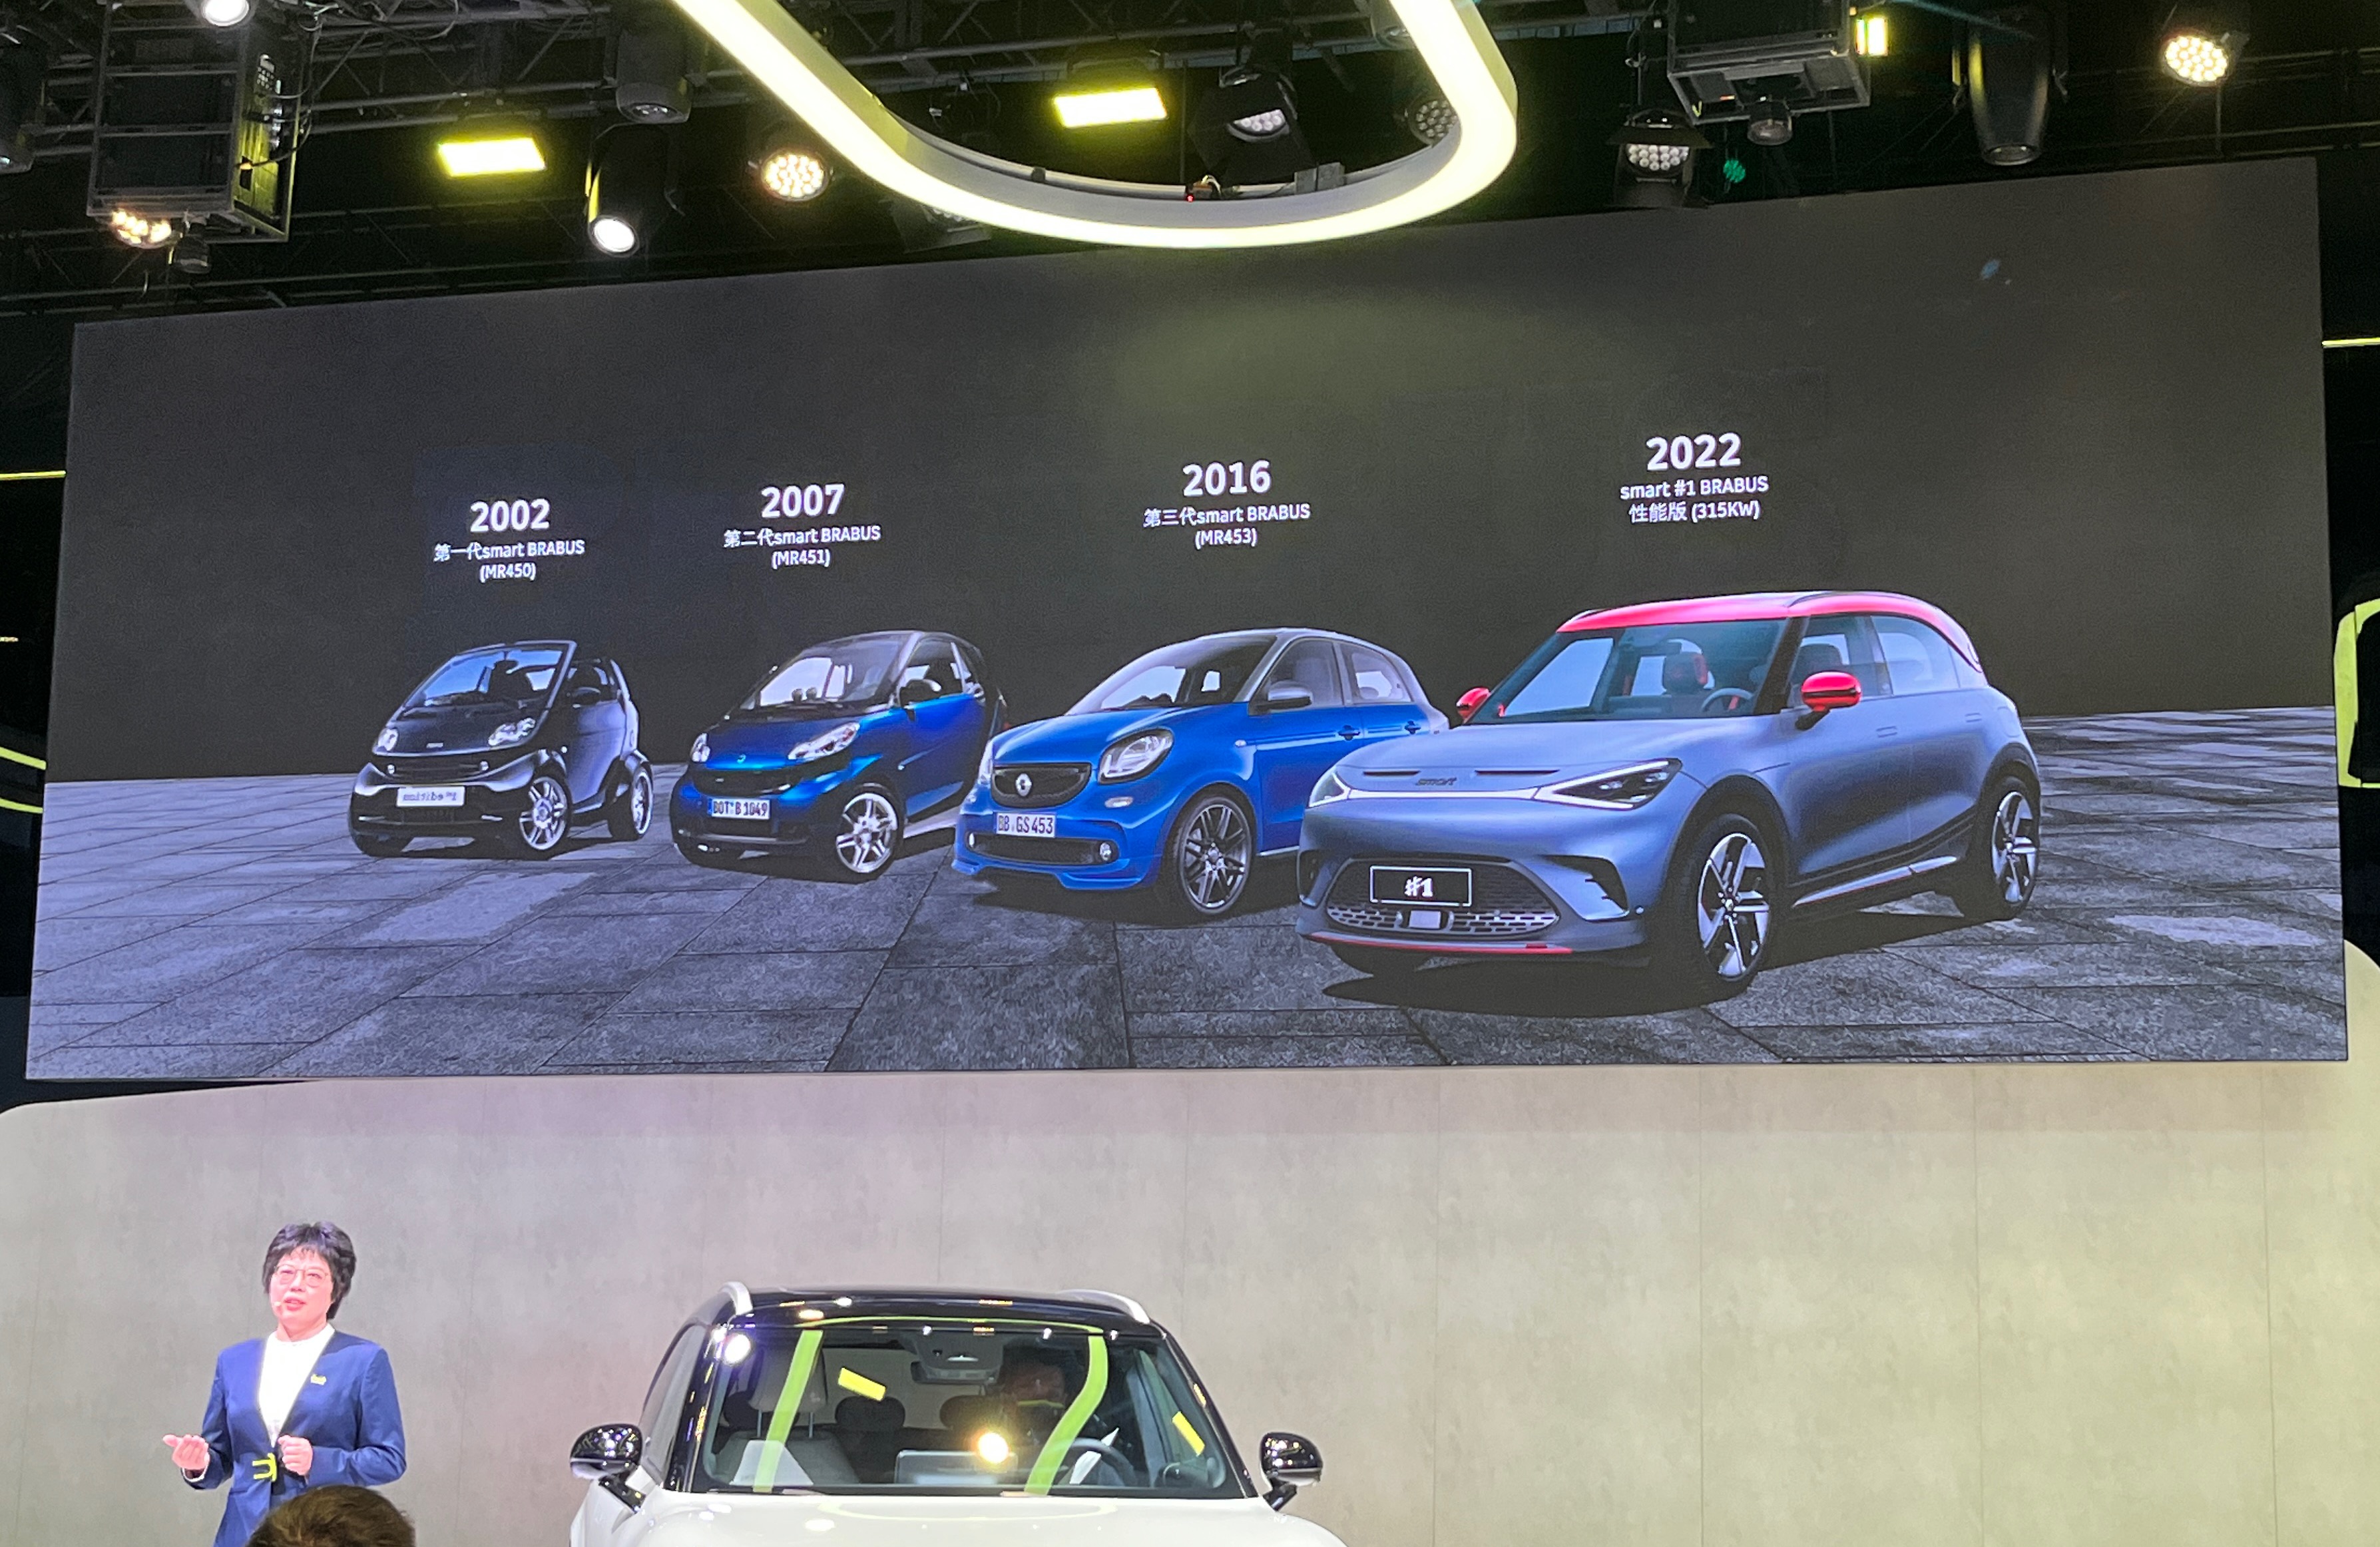 Smart #1 Brabus Unveiled On The Chengdu Auto Show In China